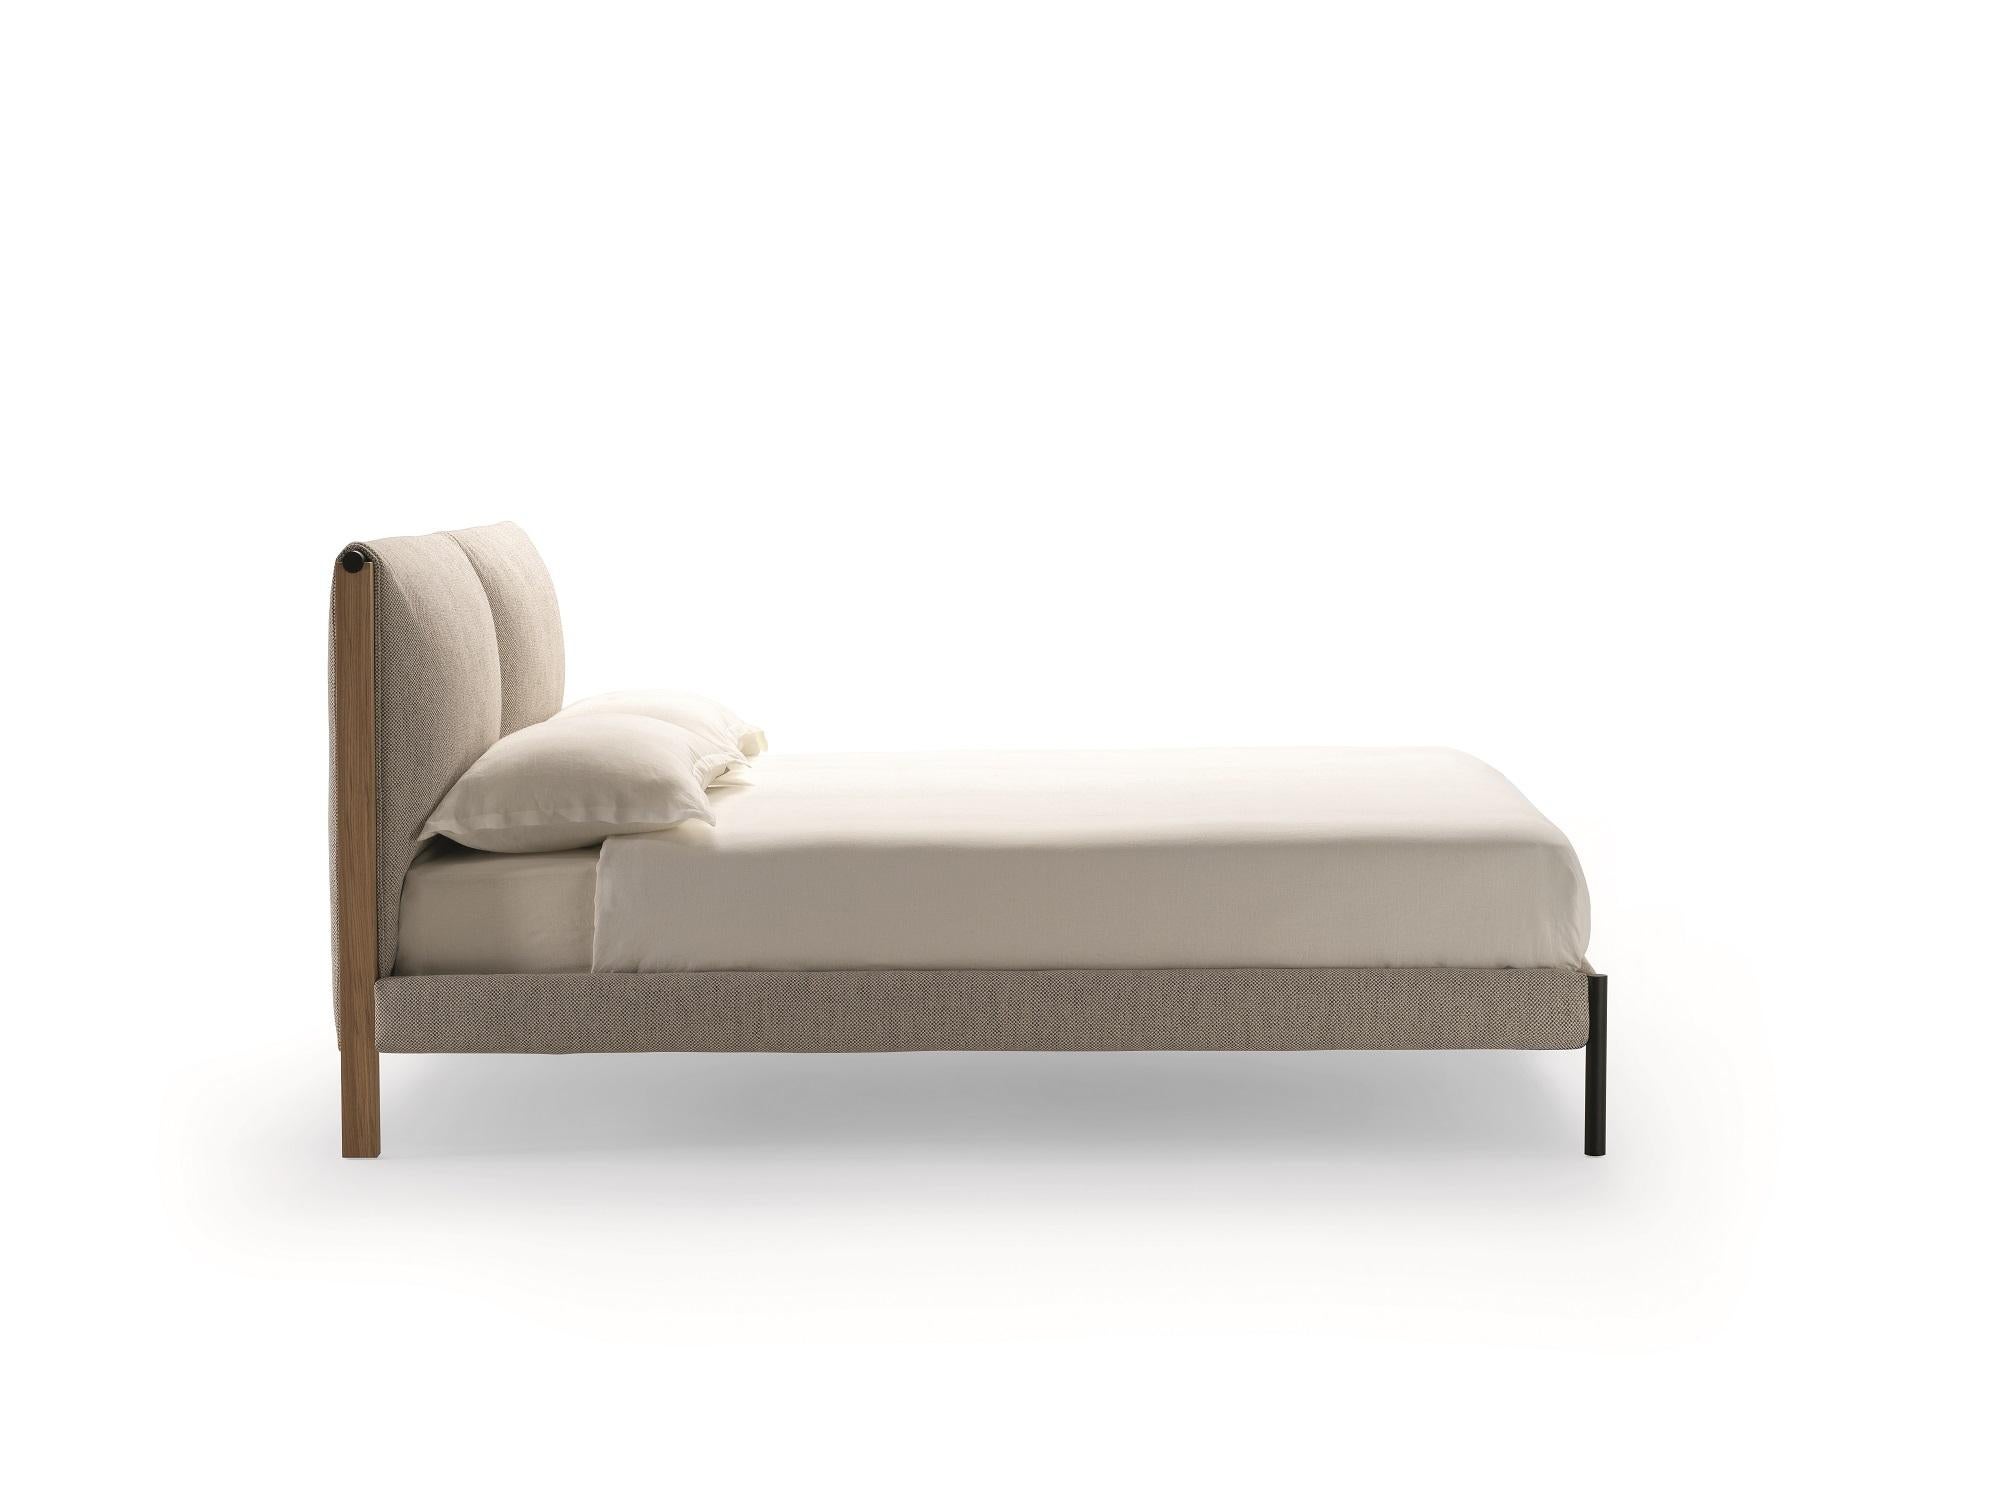 Zanotta King Size Ricordi Bed with Single Springing in Toce Upholstery by Spalvieri & Del Ciotto

Bed with single springing. Headboard frame in natural or in open pore black painted oak. Upholstery in polyurethane/heat-bound polyester fibre. Front